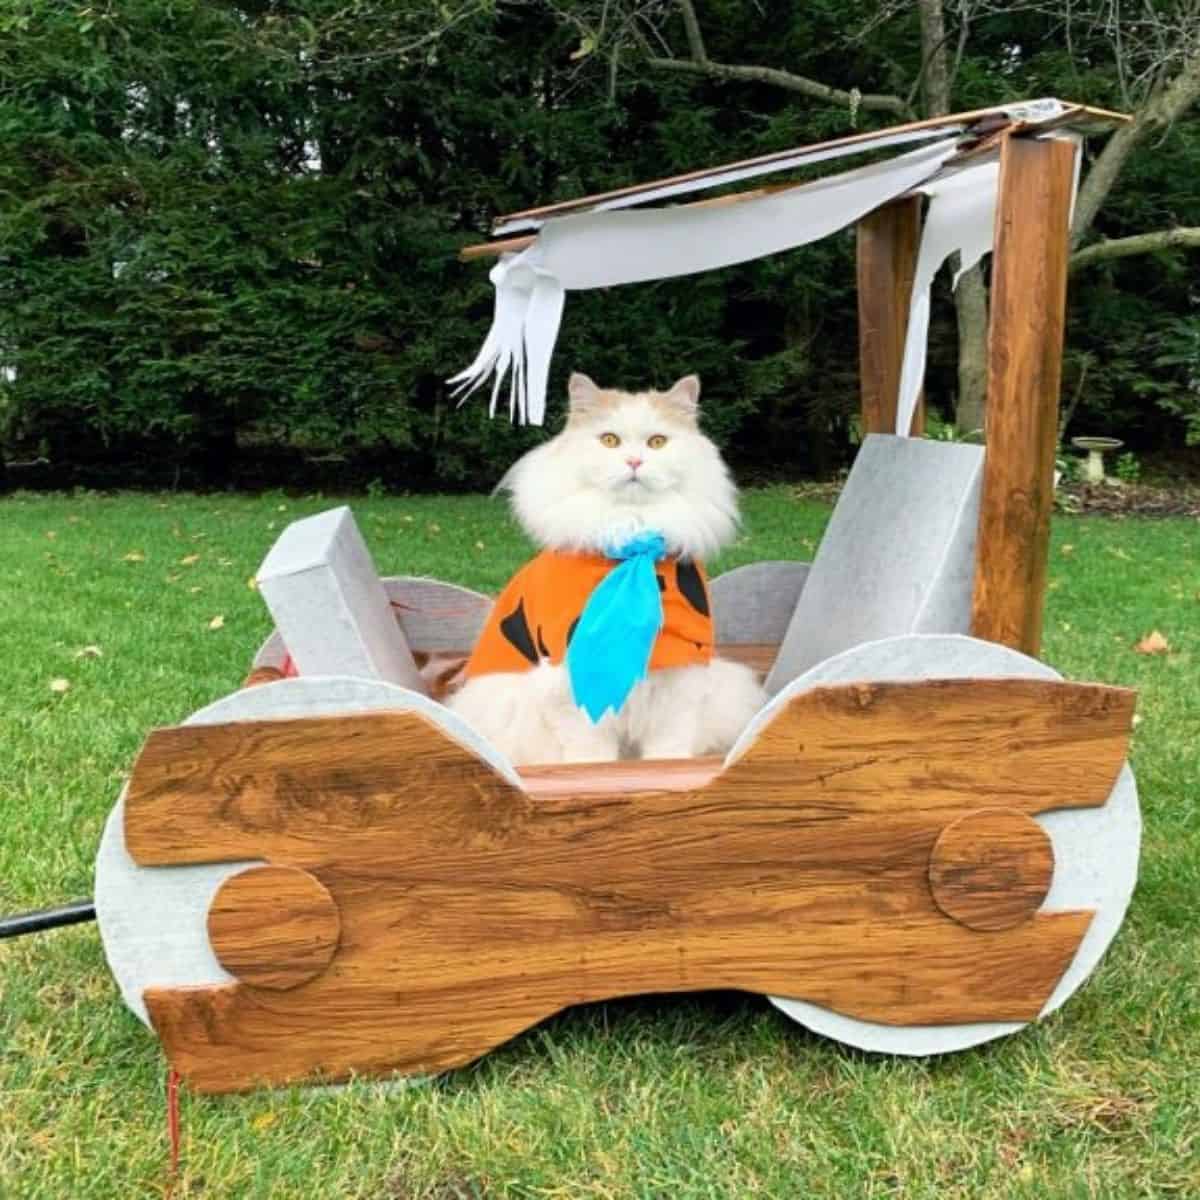 white cat in a wooden cart on the grass